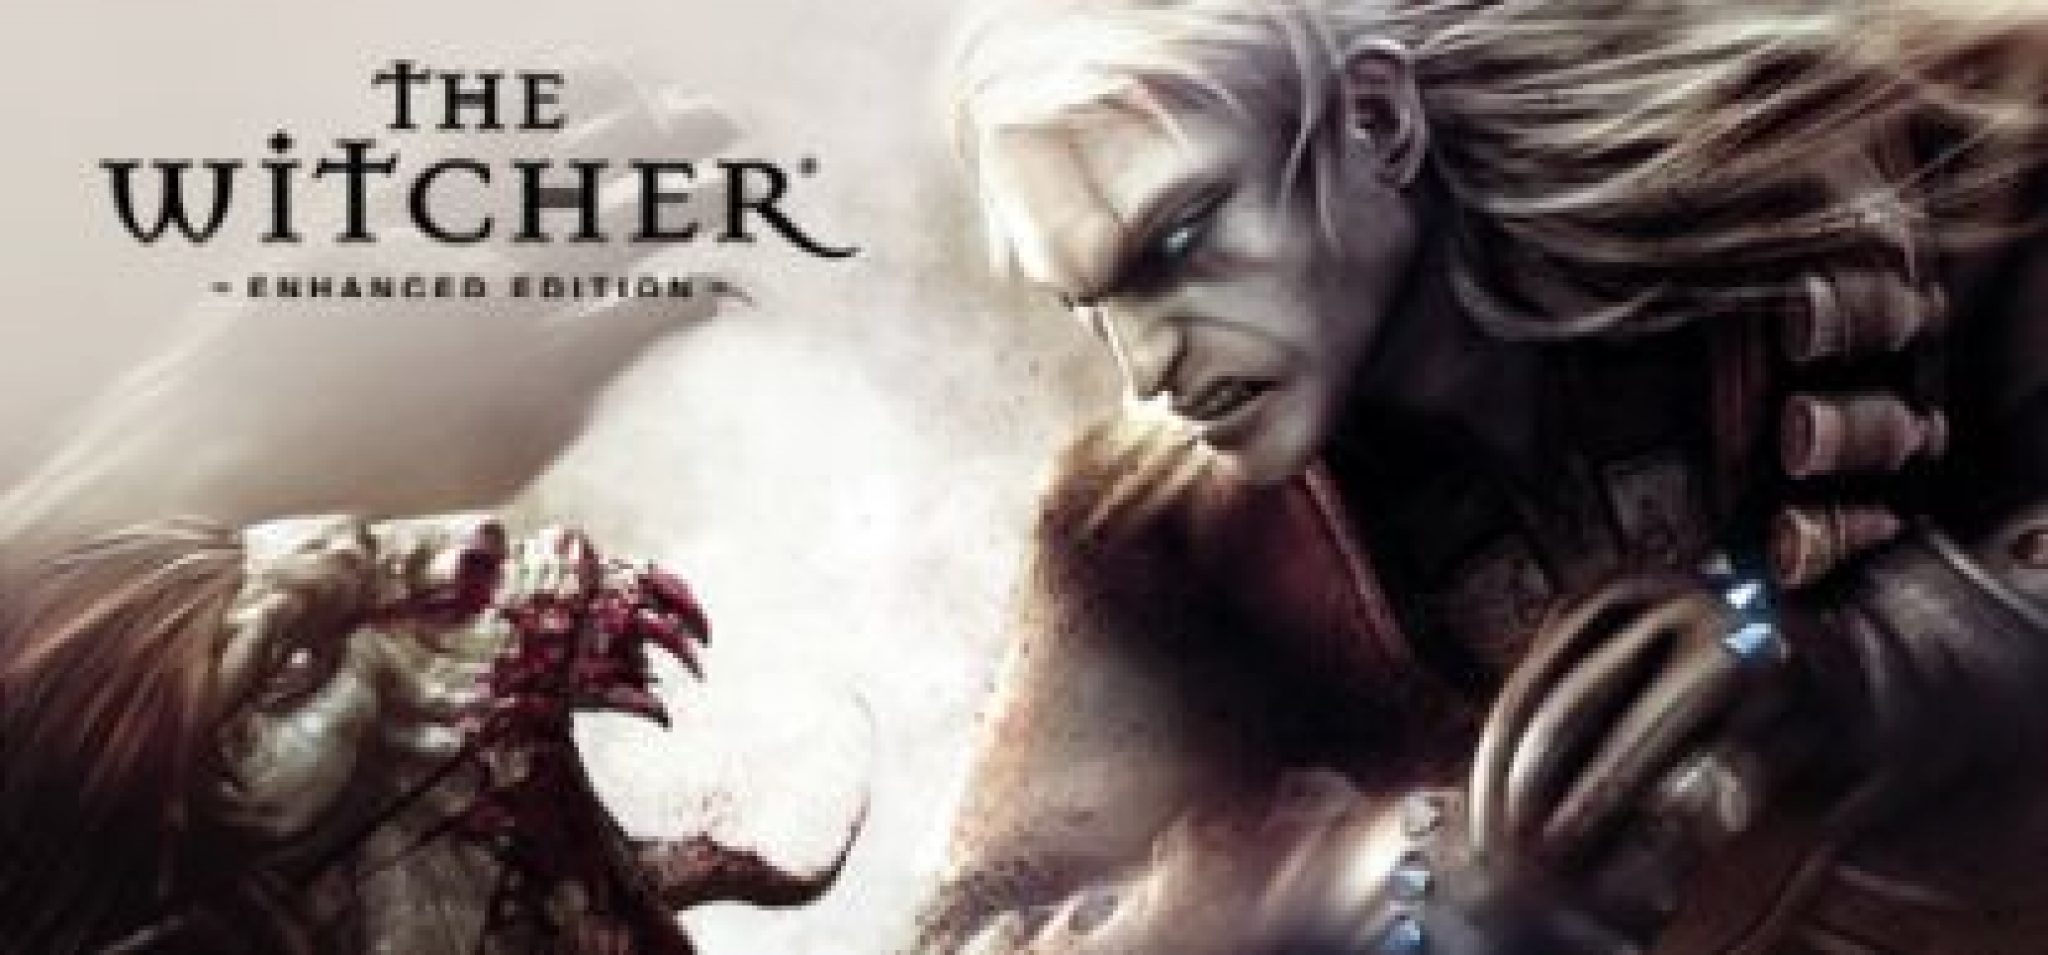 the witcher 1 full game download for pc